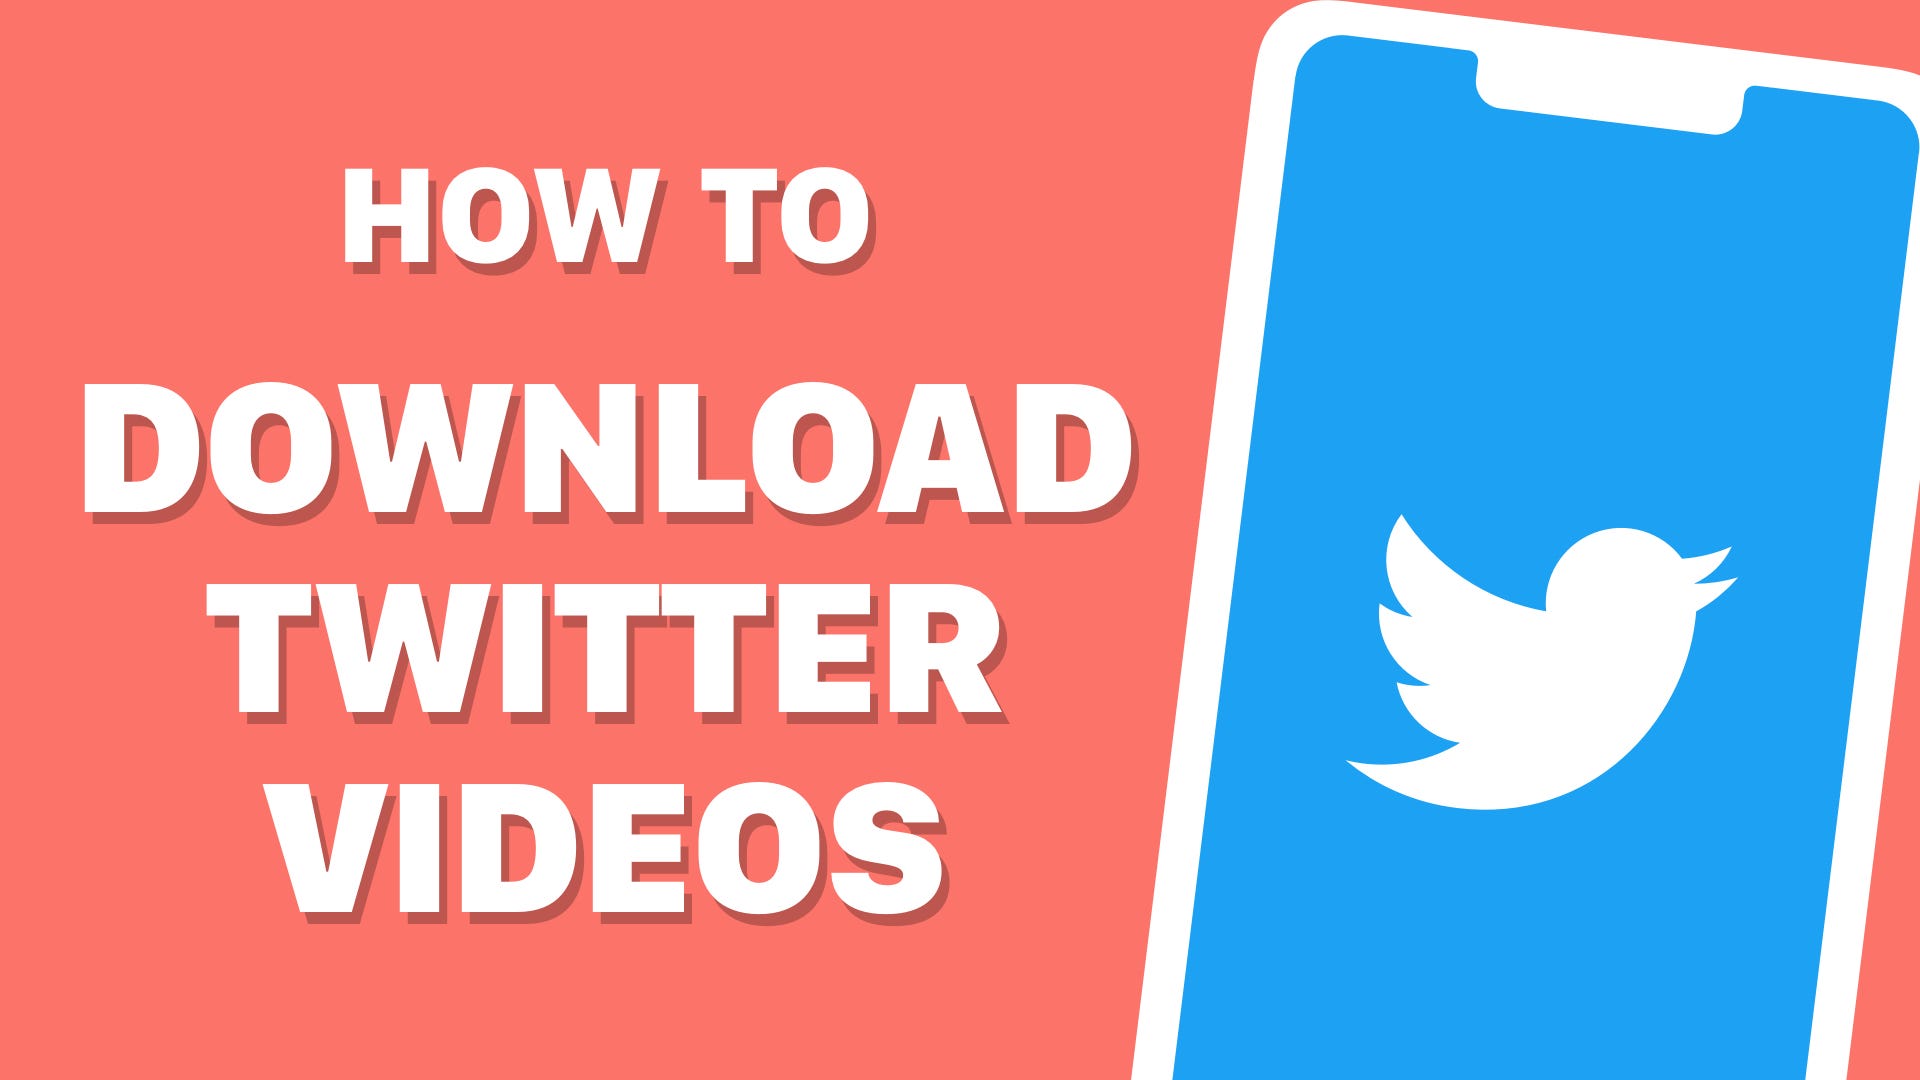 How To Download Twitter Videos On Iphone Clipbox Video Downloader App By Nate Roman Vlipsy